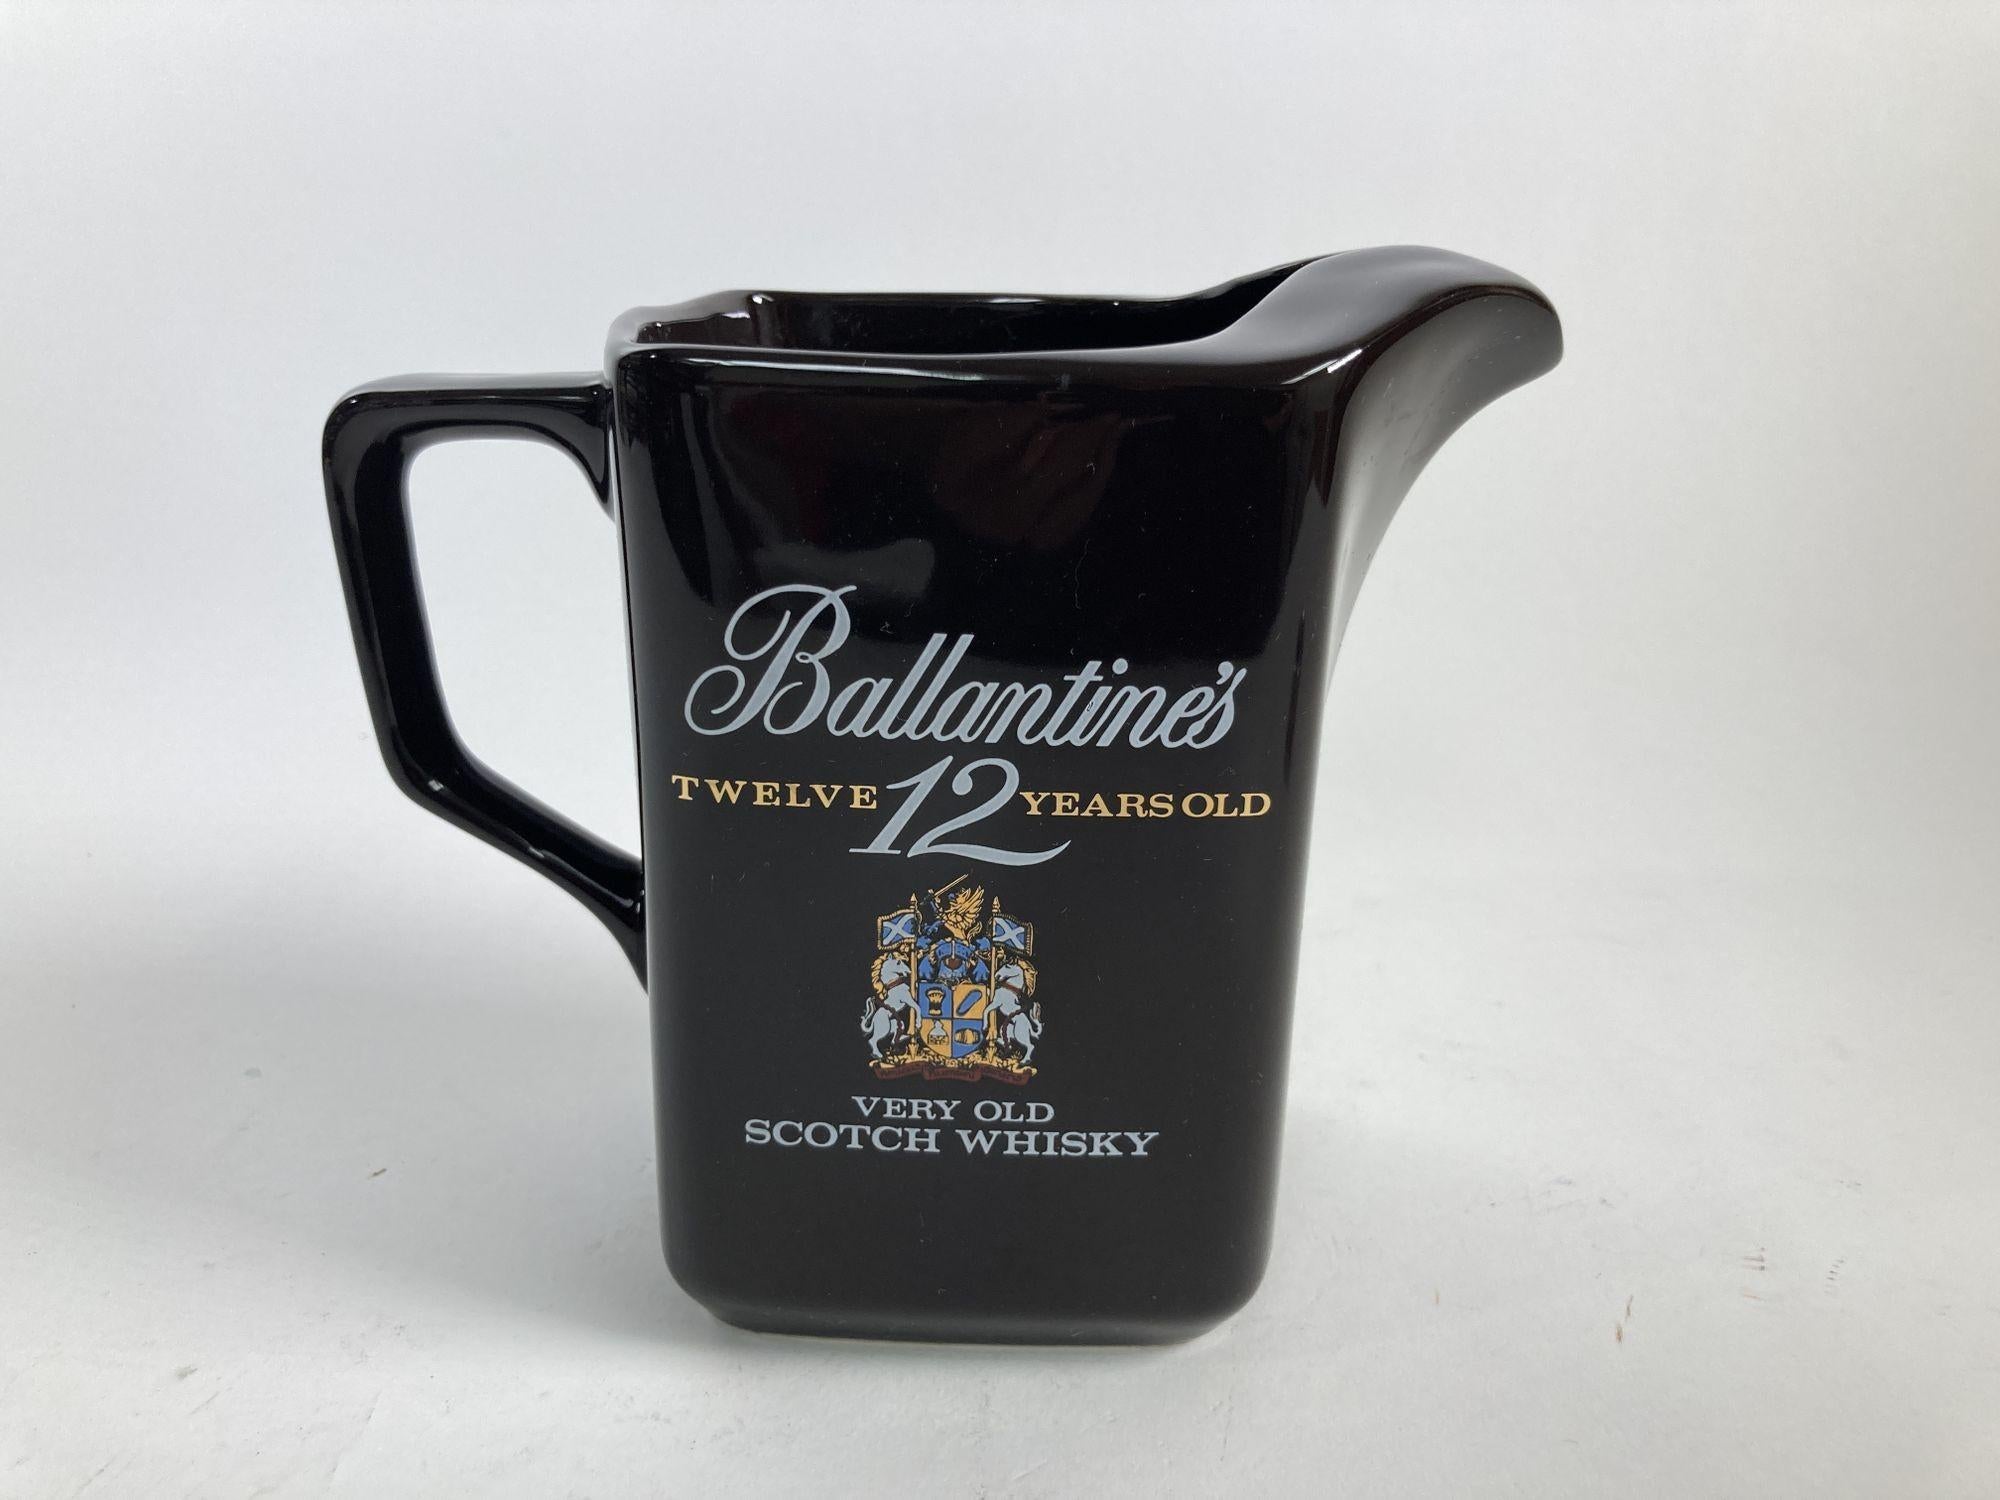 Vintage collectible black ceramic pitcher for Ballantine's 12 years old whisky pub jug bar pitcher.
Vintage Ballantine's advertising pub pitcher, water Jug, ceramic jar, water Jar, scotch whisky.
These collectible ceramic pitchers were used on bar